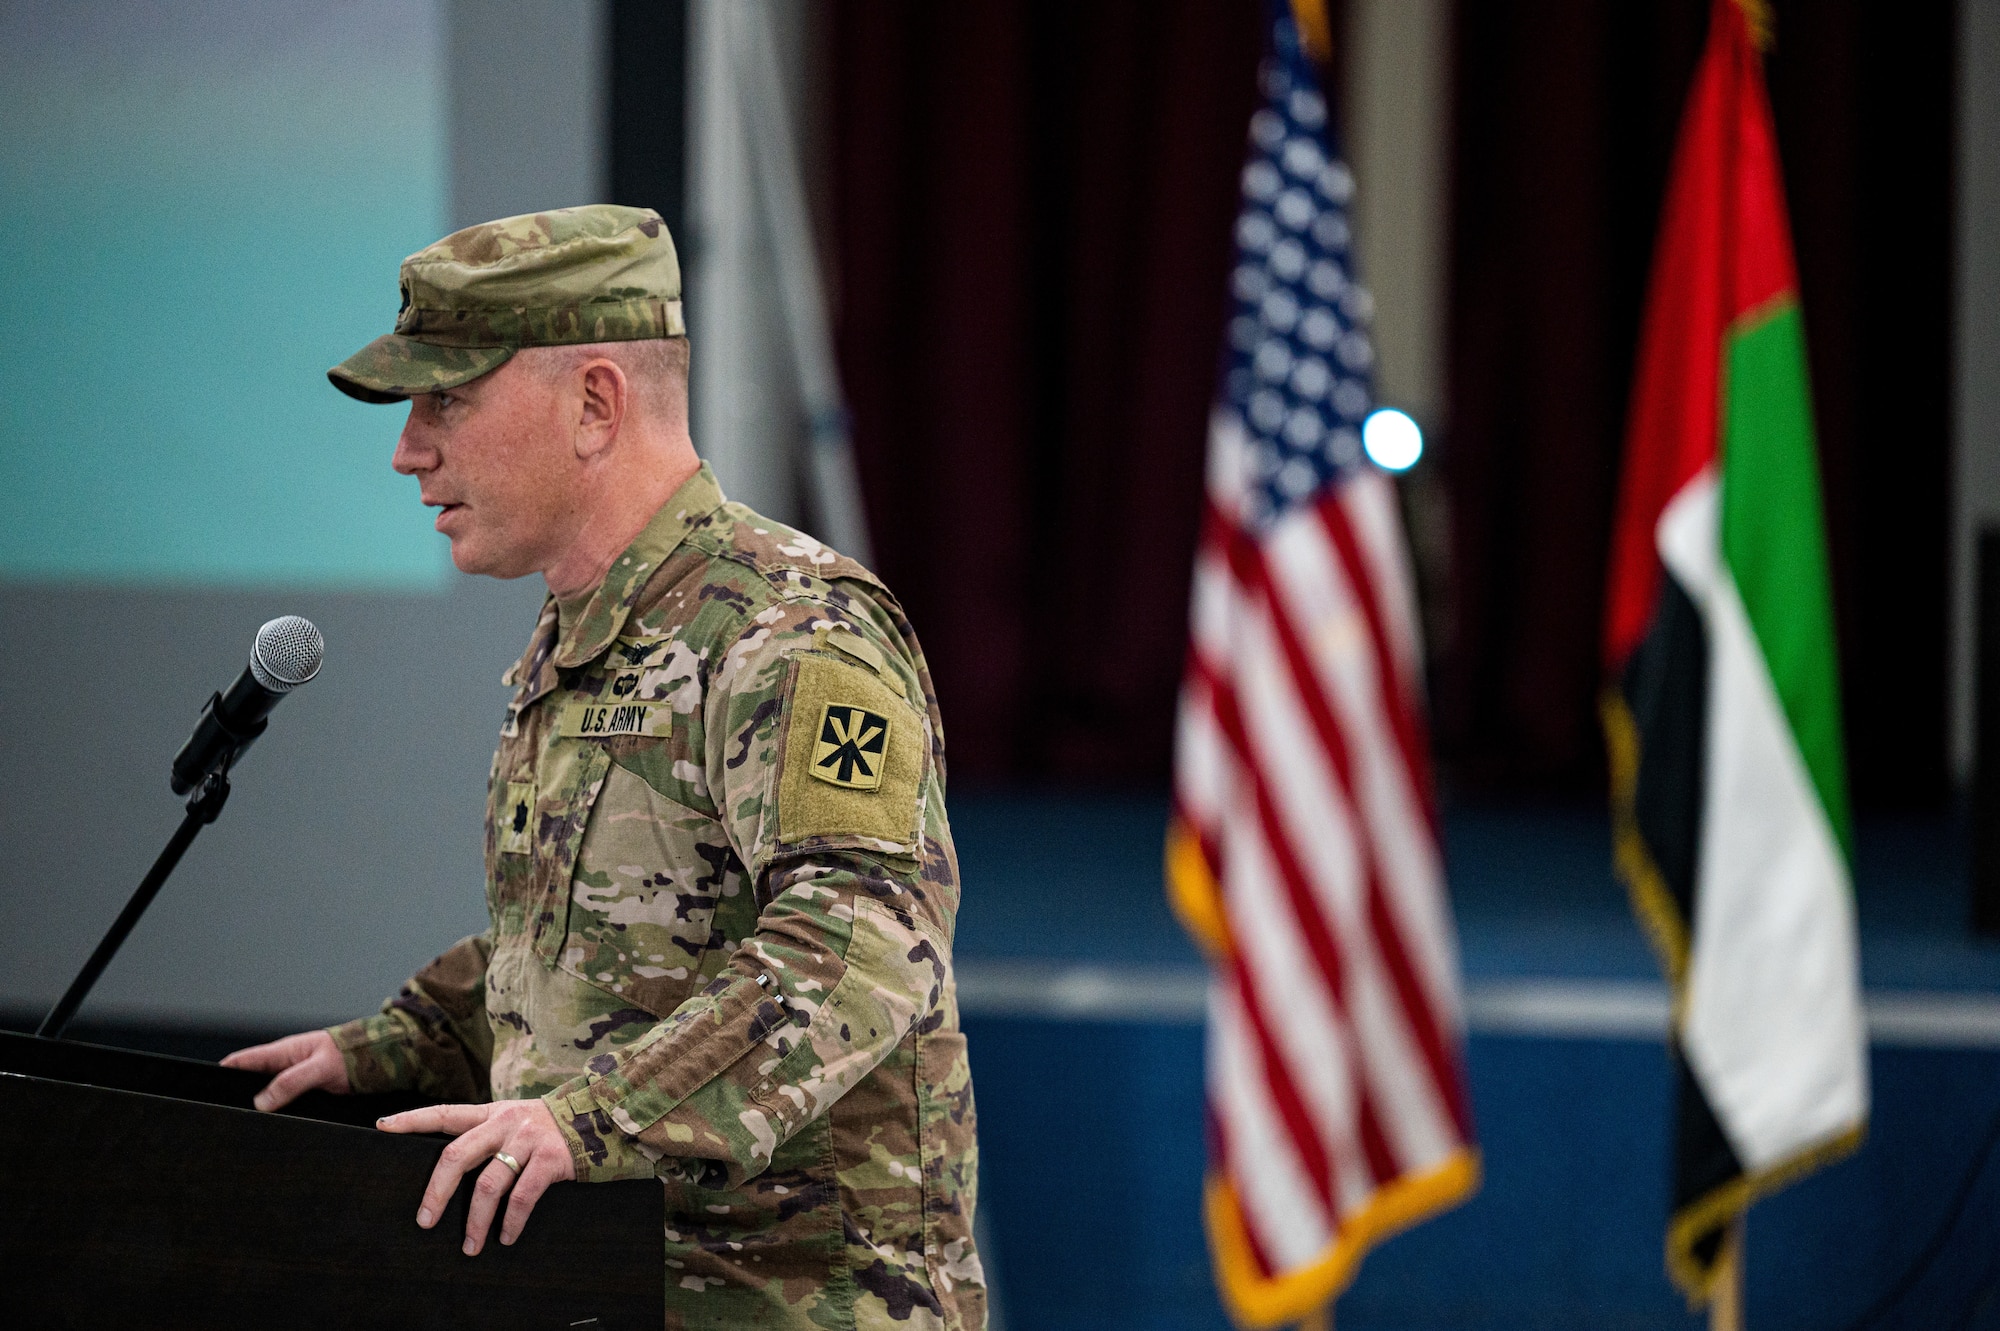 U.S. Army Lt. Col. Kurt Pryor, Commander of the 2nd Battalion 43rd Air Defense Artillery Regiment (2-43 ADA), gives remarks at the Transfer of Authority of 4th Battalion 3rd Air Defense Artillery Regiment (4-3 ADA) as the 2-43 ADA resumes the 4-3 ADA’s responsibilities on Jan. 26, 2023, at Al Dhafra Air Base, United Arab Emirates. The 2-43 ADA arrived at Al Dhafra AB on Jan. 6, 2023, from Ft. Bliss, Texas, and will operate and maintain the Patriot Battery systems at Al Dhafra AB.